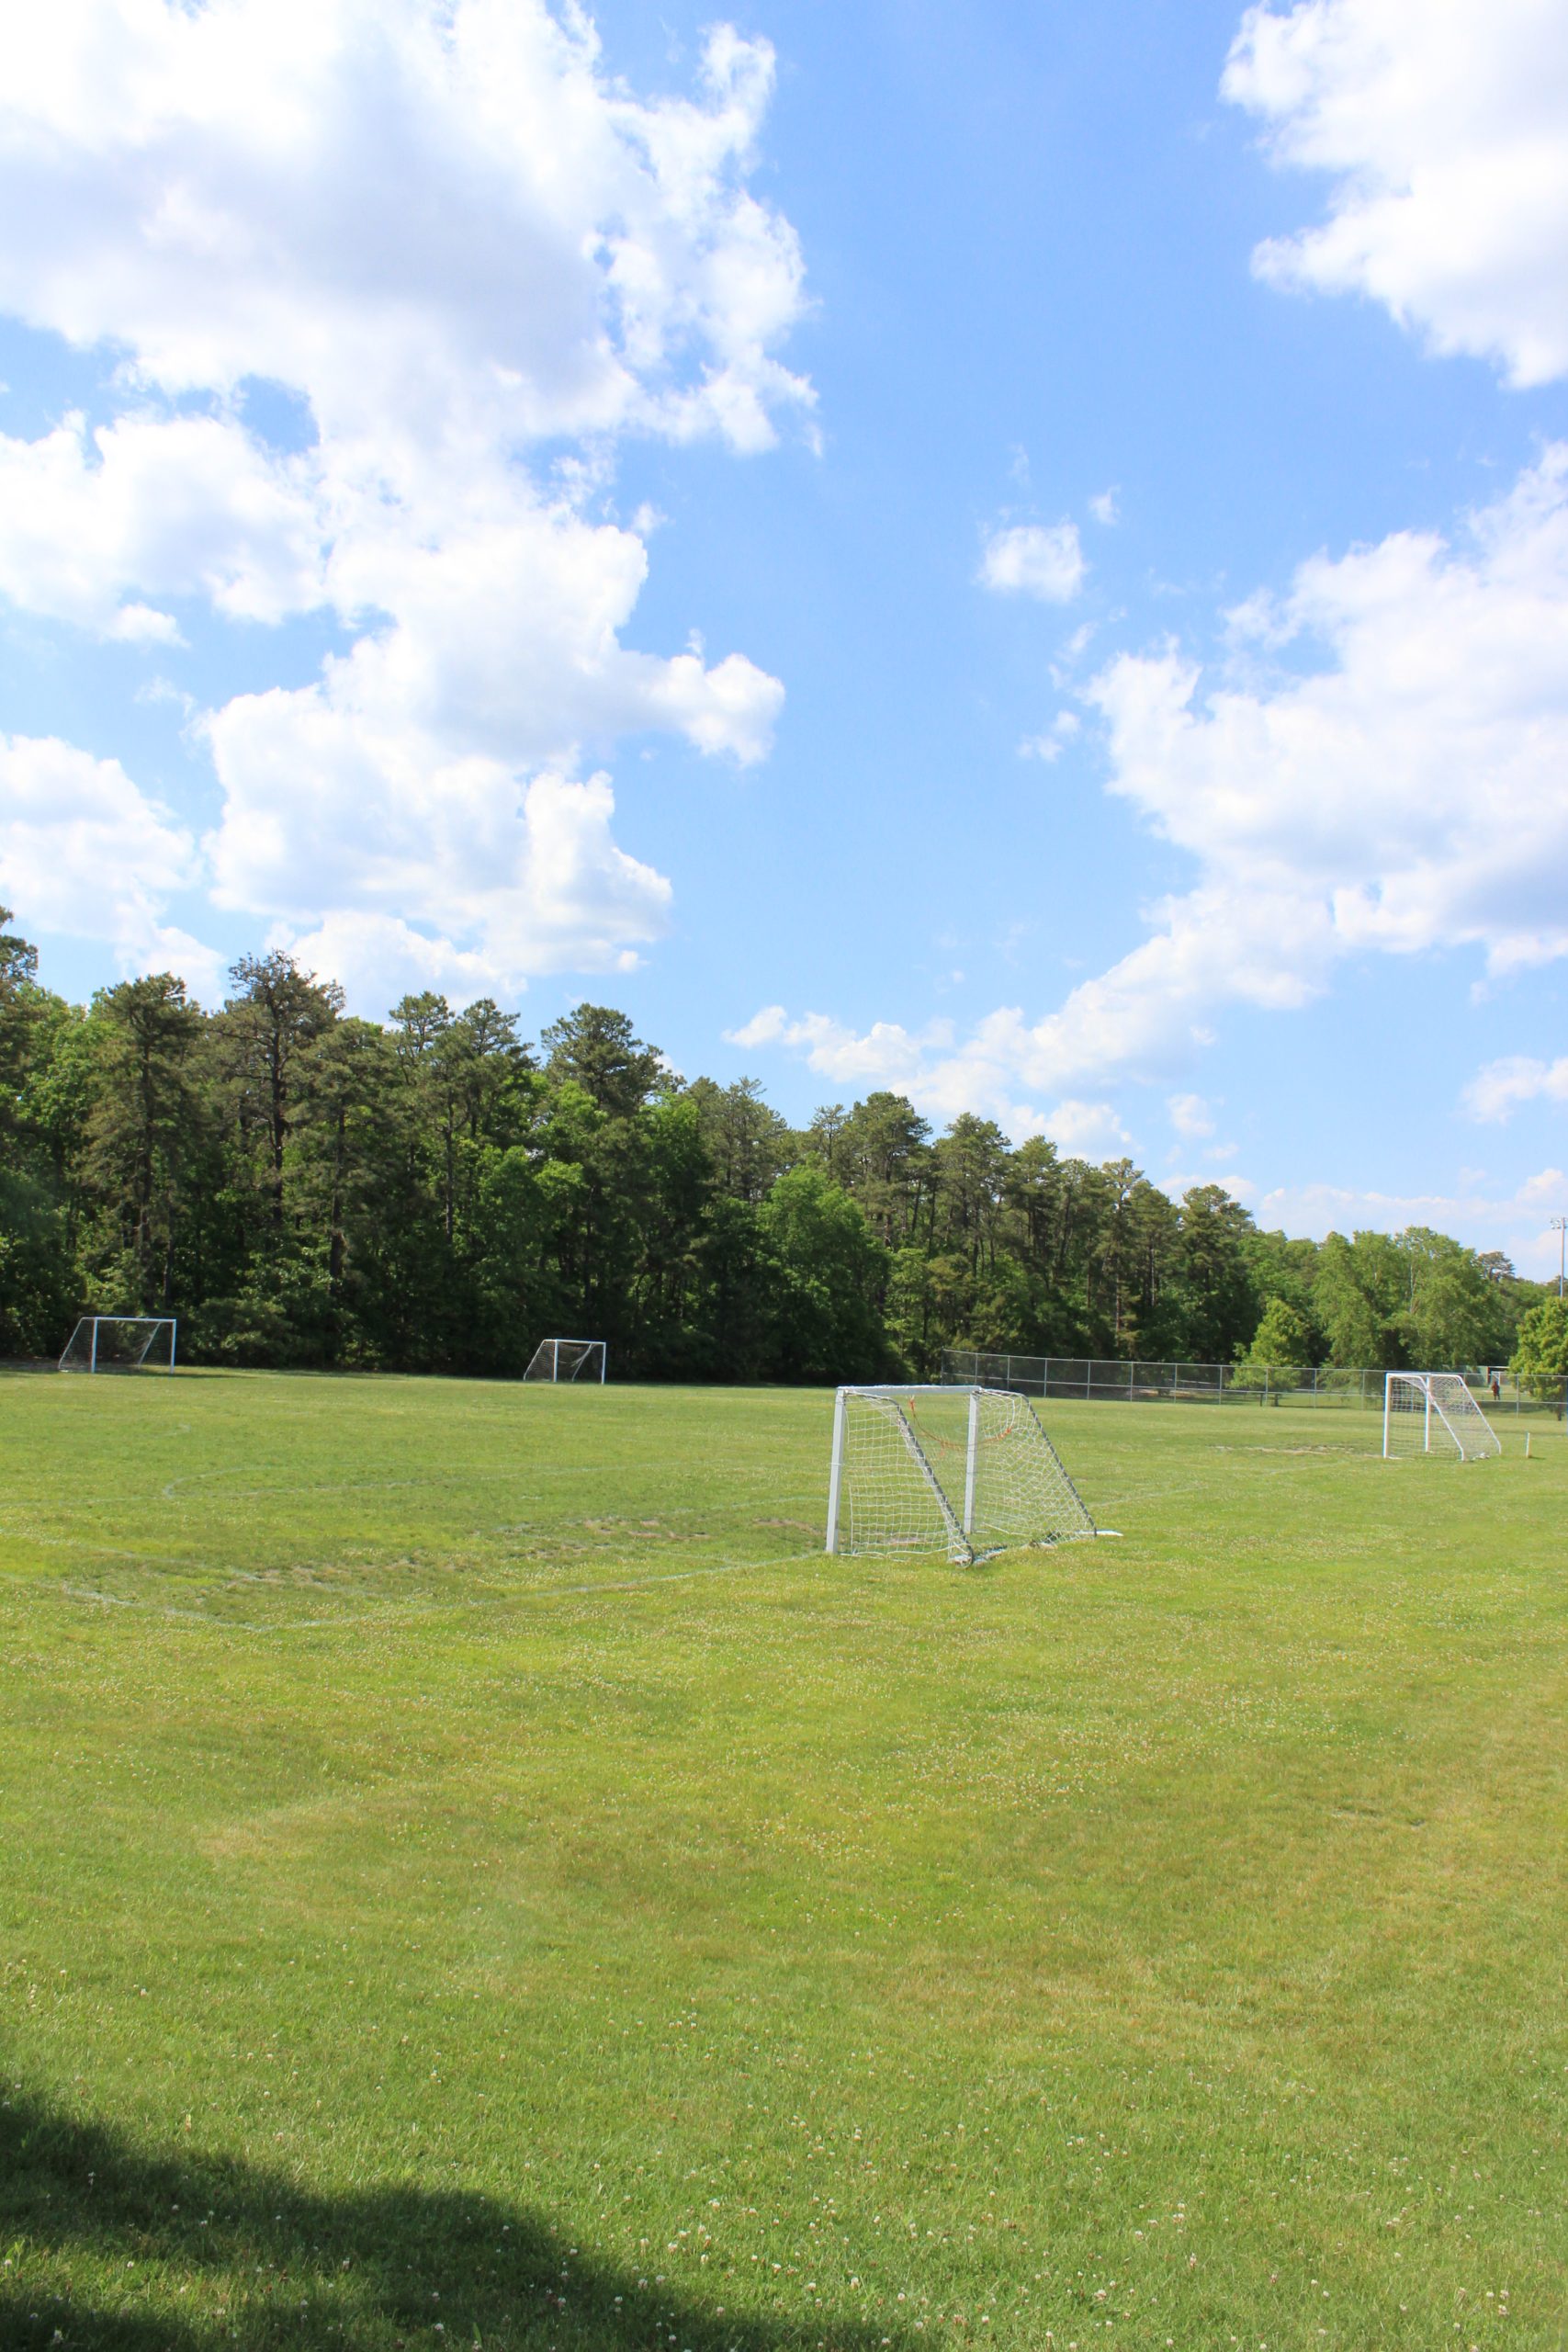 soccer fields at Tony Canale Park in Egg Harbor Township New Jersey